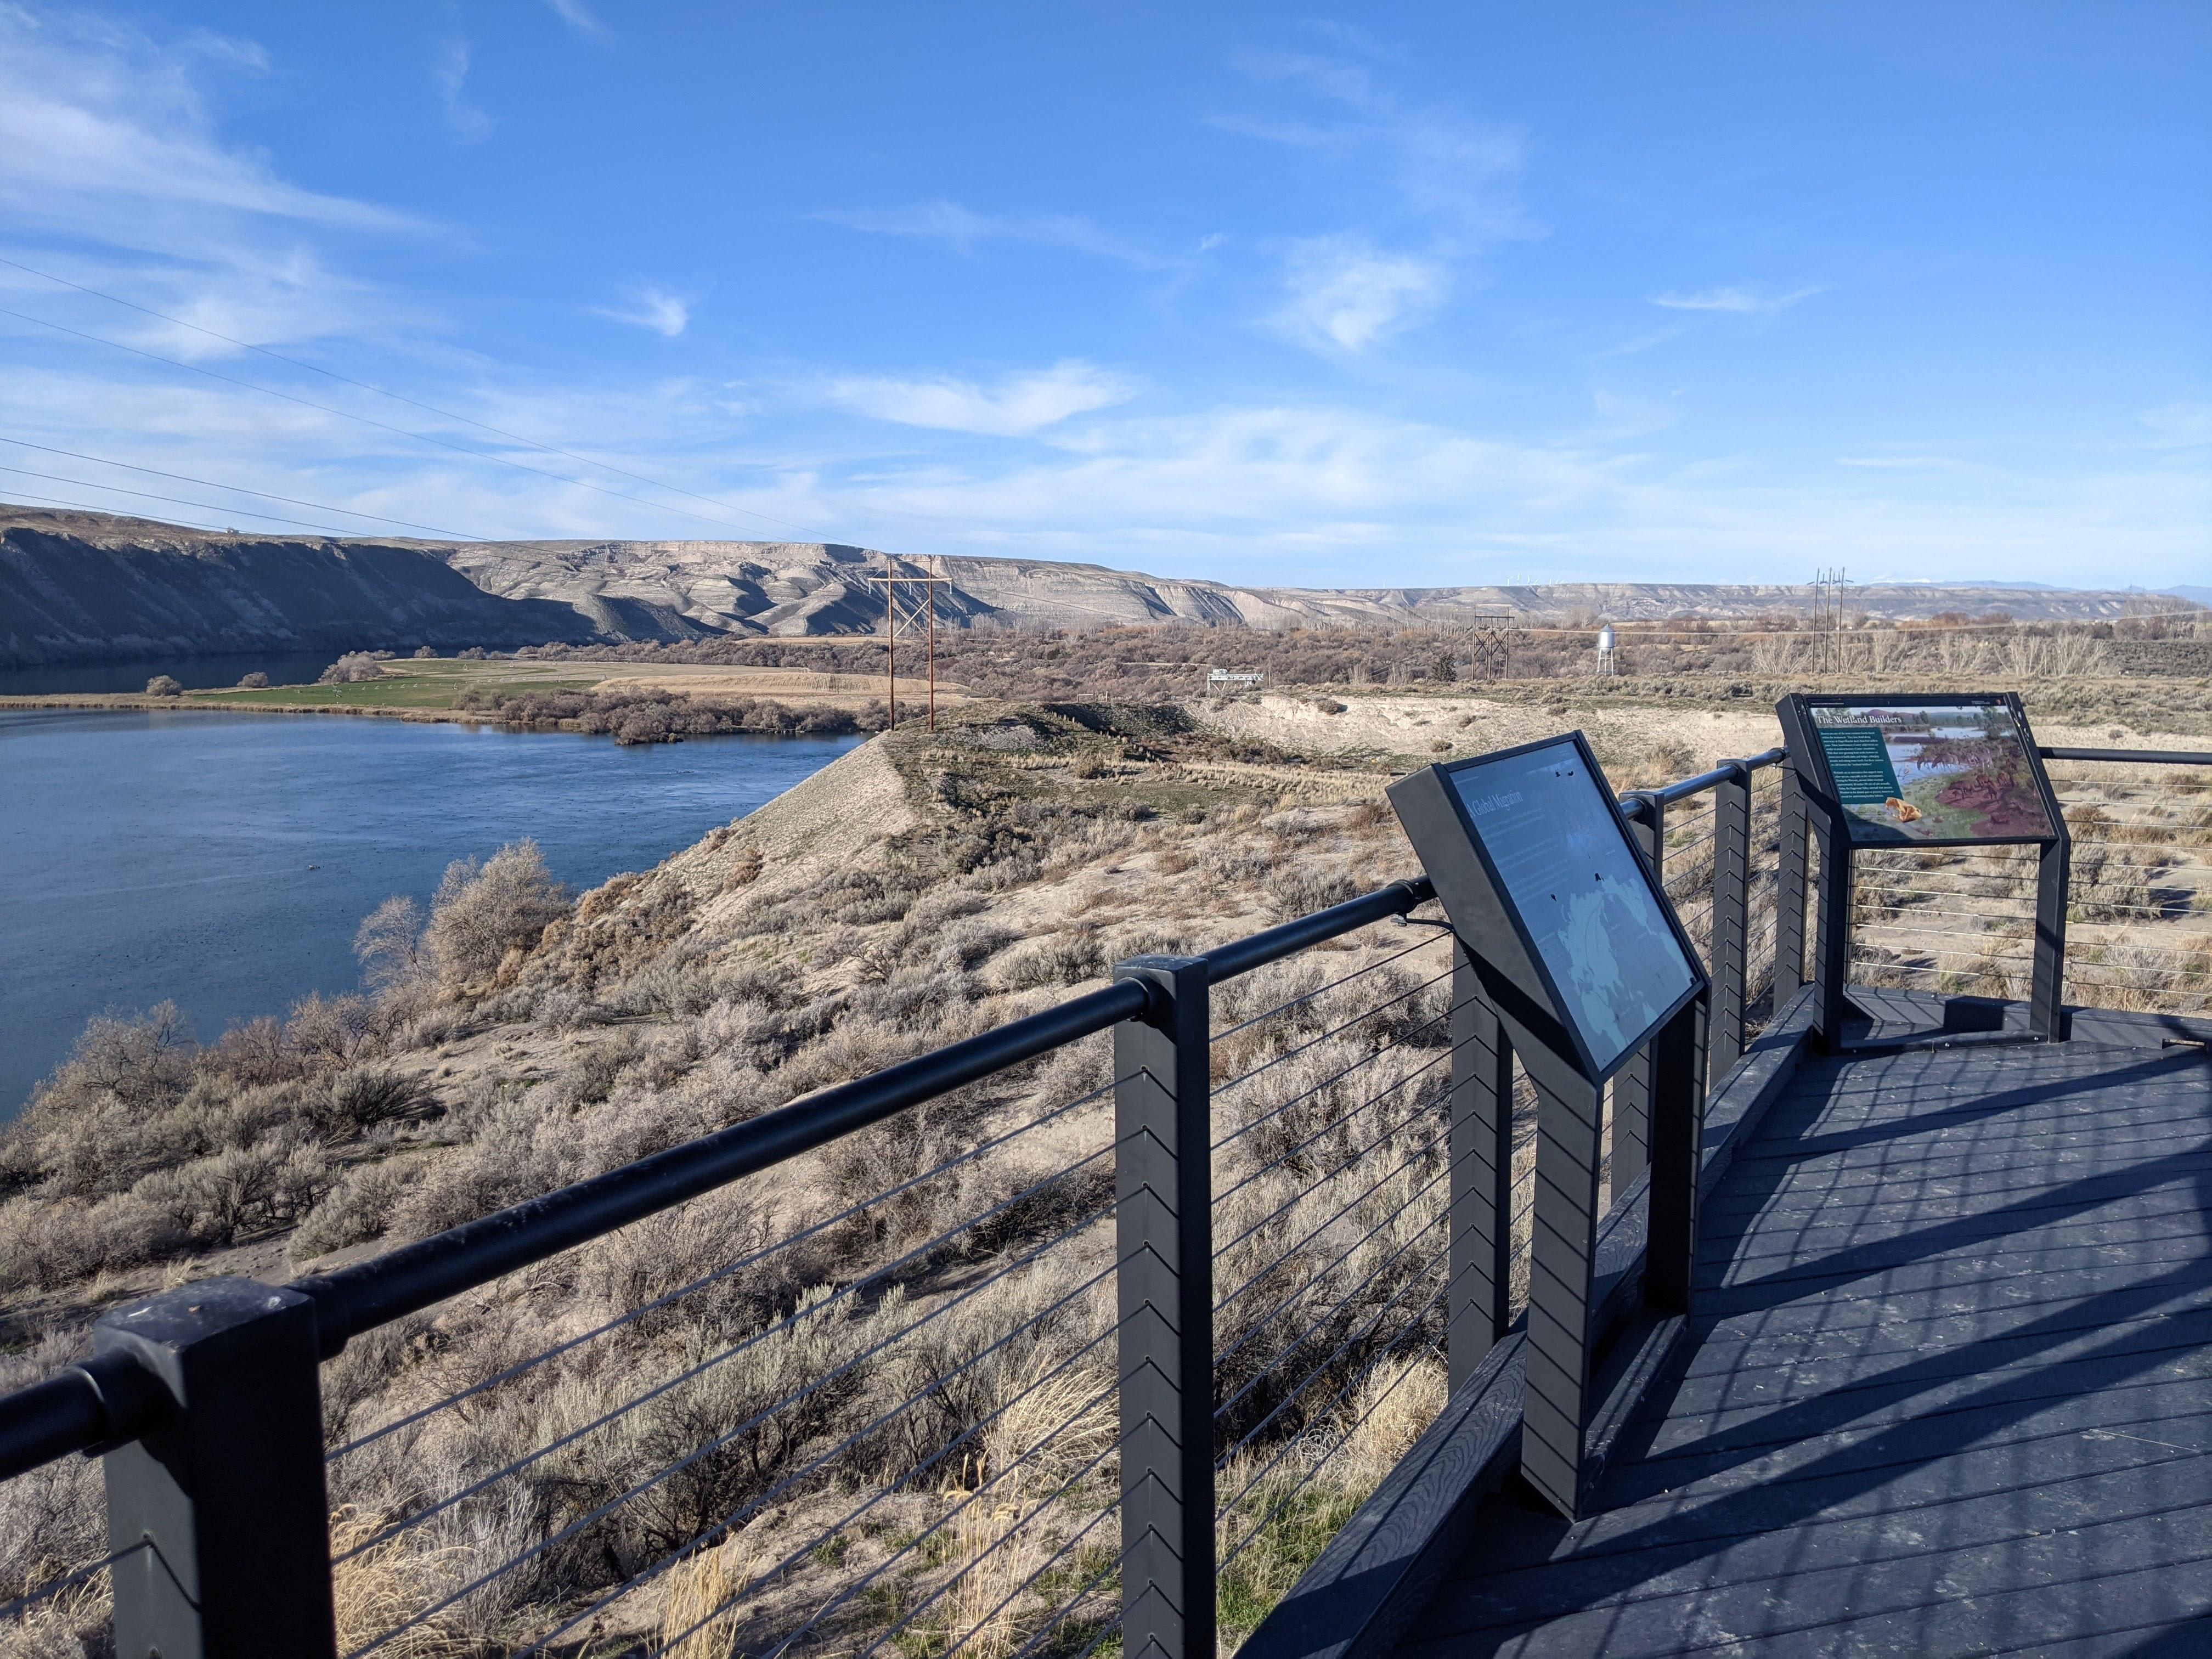 A wooden platform with railing, along with two exhibit signs, overlooks the river and fossil beds.